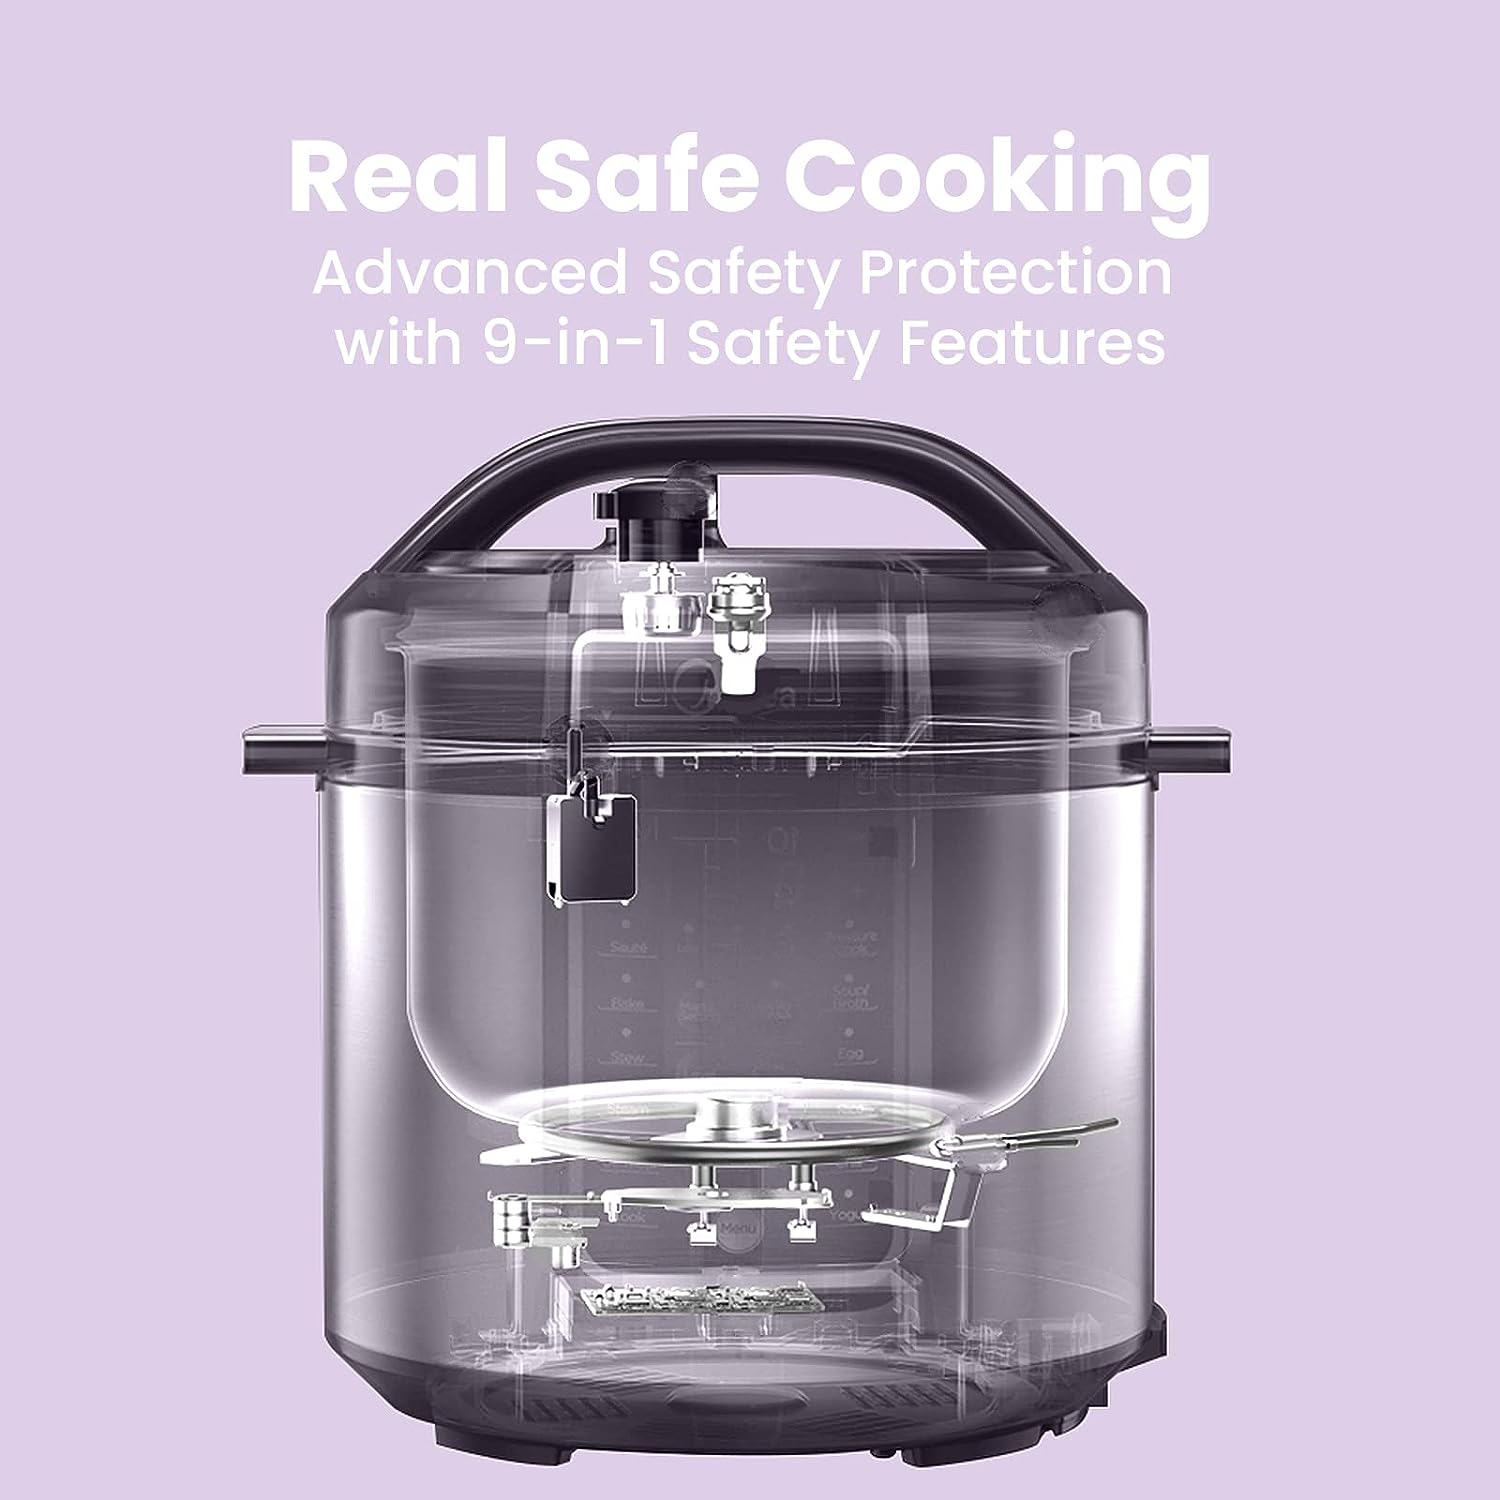 https://bigbigmart.com/wp-content/uploads/2023/08/COMFEE-Pressure-Cooker-6-Quart-with-12-Presets-Multi-Functional-Programmable-Slow-Cooker-Rice-Cooker-Steamer-Saute-pan-Egg-Cooker-Warmer-and-More5.jpg